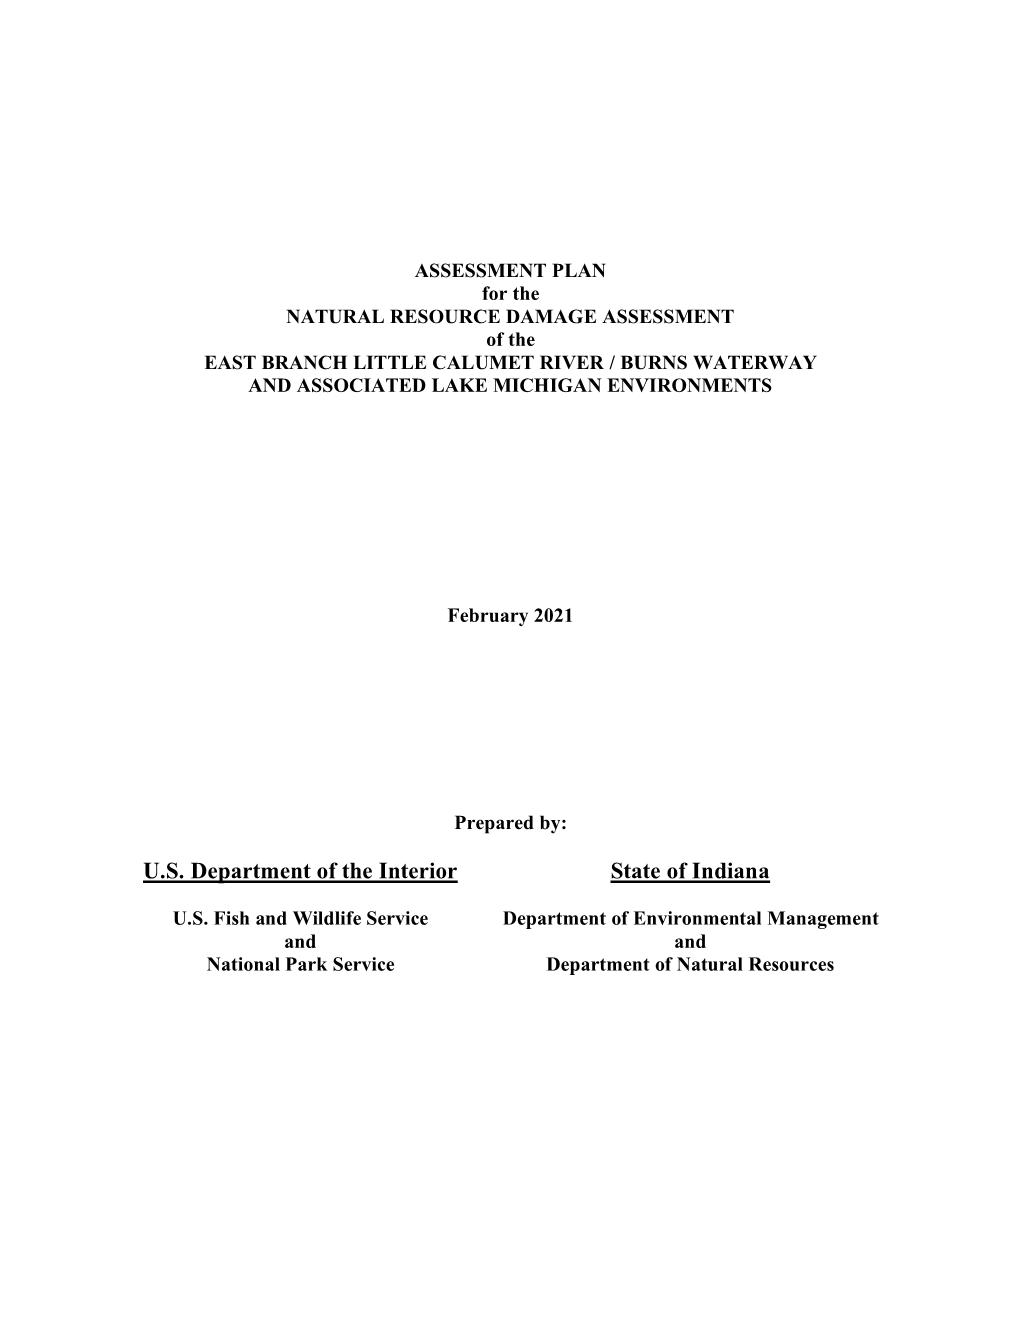 ASSESSMENT PLAN for the NATURAL RESOURCE DAMAGE ASSESSMENT of the EAST BRANCH LITTLE CALUMET RIVER / BURNS WATERWAY and ASSOCIATED LAKE MICHIGAN ENVIRONMENTS